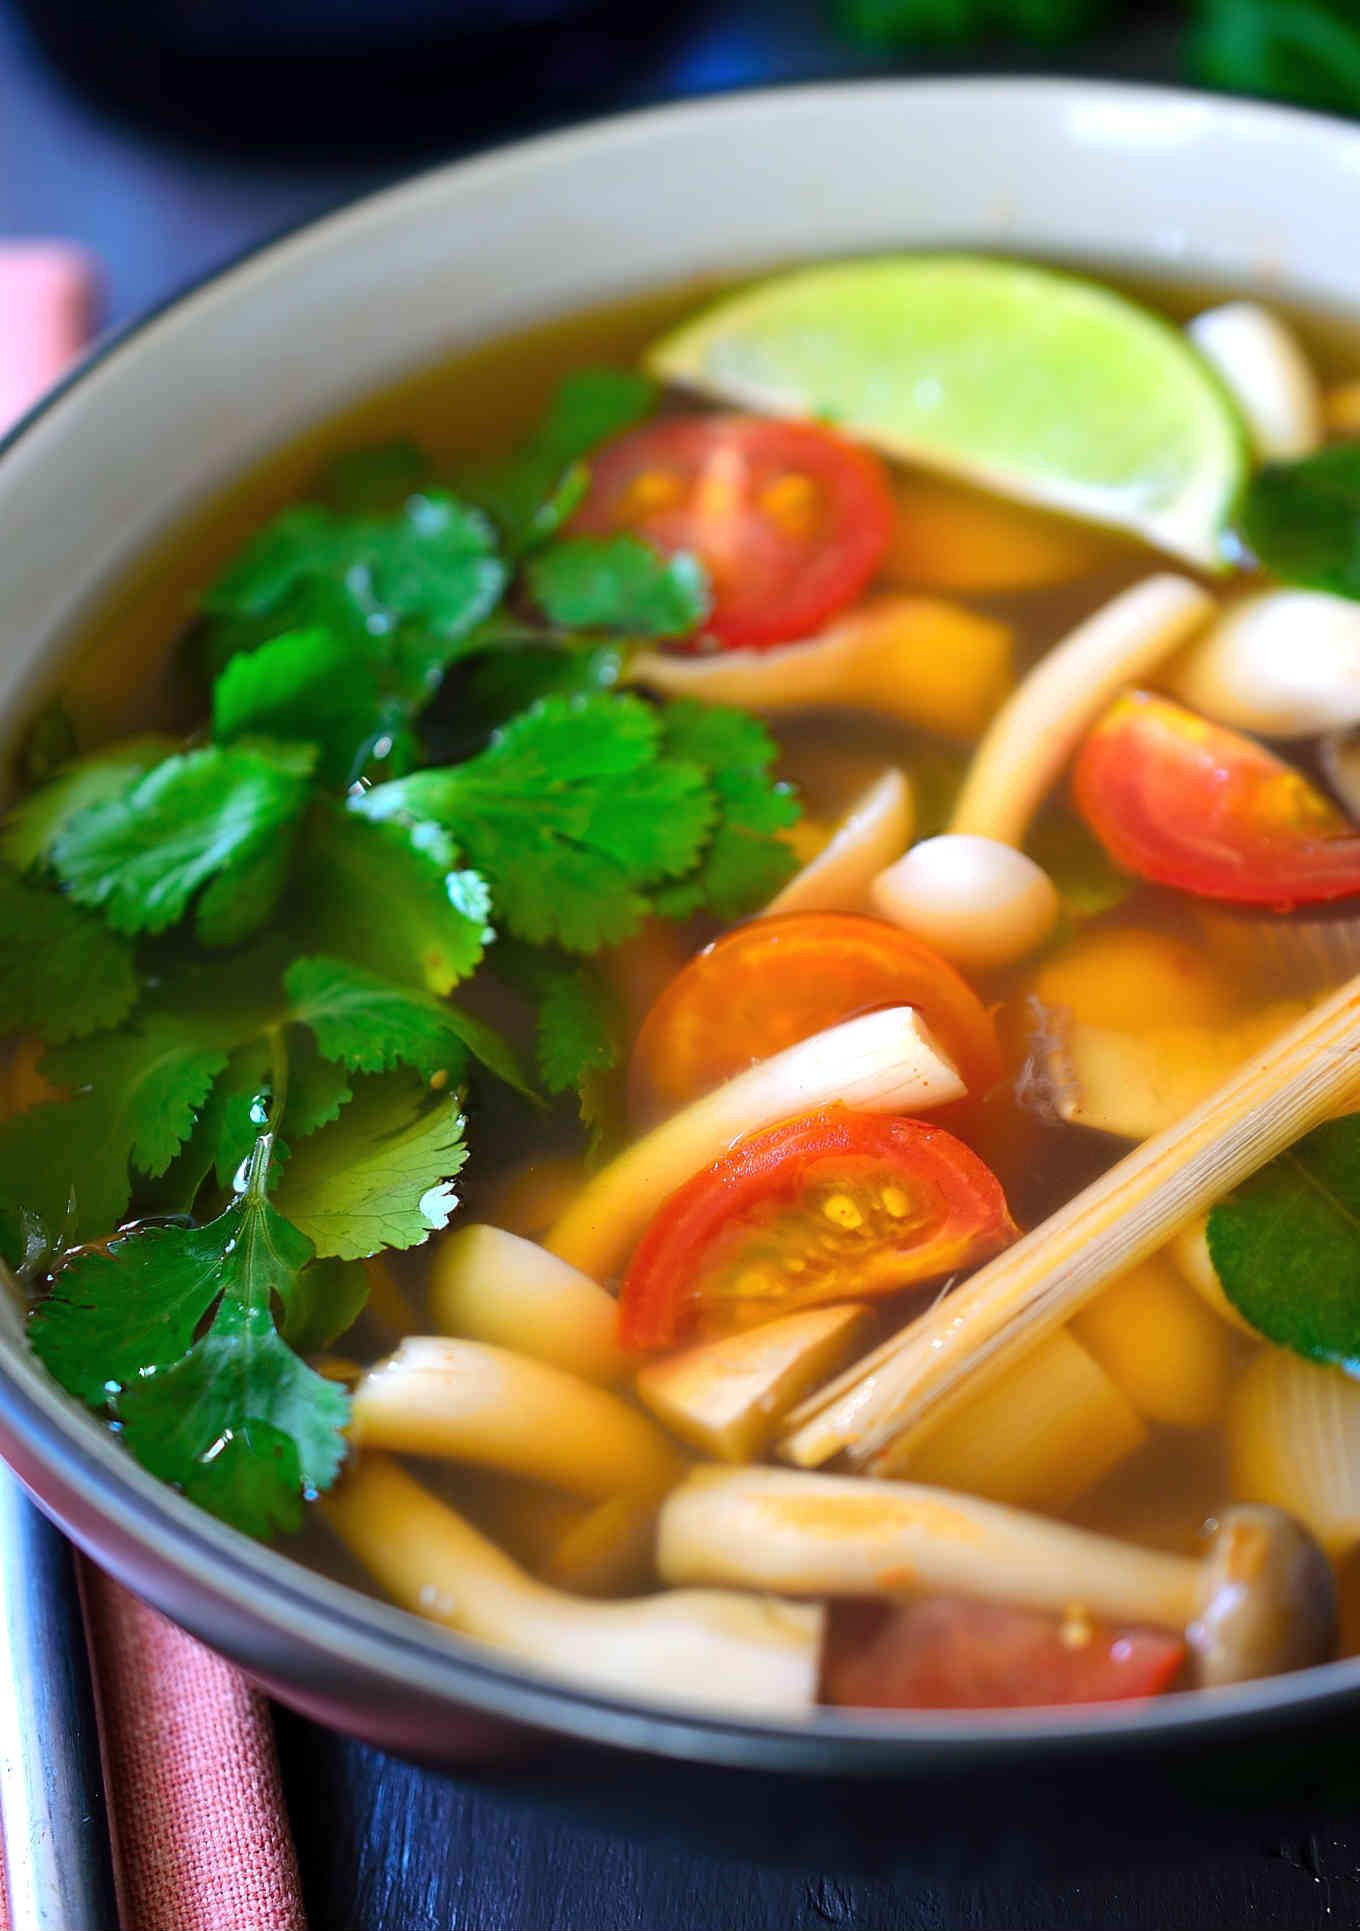 This vegetarian tom yum soup recipe is light, flavourful, spicy and hearty all at the same time. A mix of meaty Asian mushrooms are poached in a fragrant broth of lemongrass and lime leaves and soured with lime juice. A spoonful of chili paste is stirred in at the end for a bit of heat to warm you up and you’ve got a nourishing, steaming bowl of soup that’s great for chilly weather.